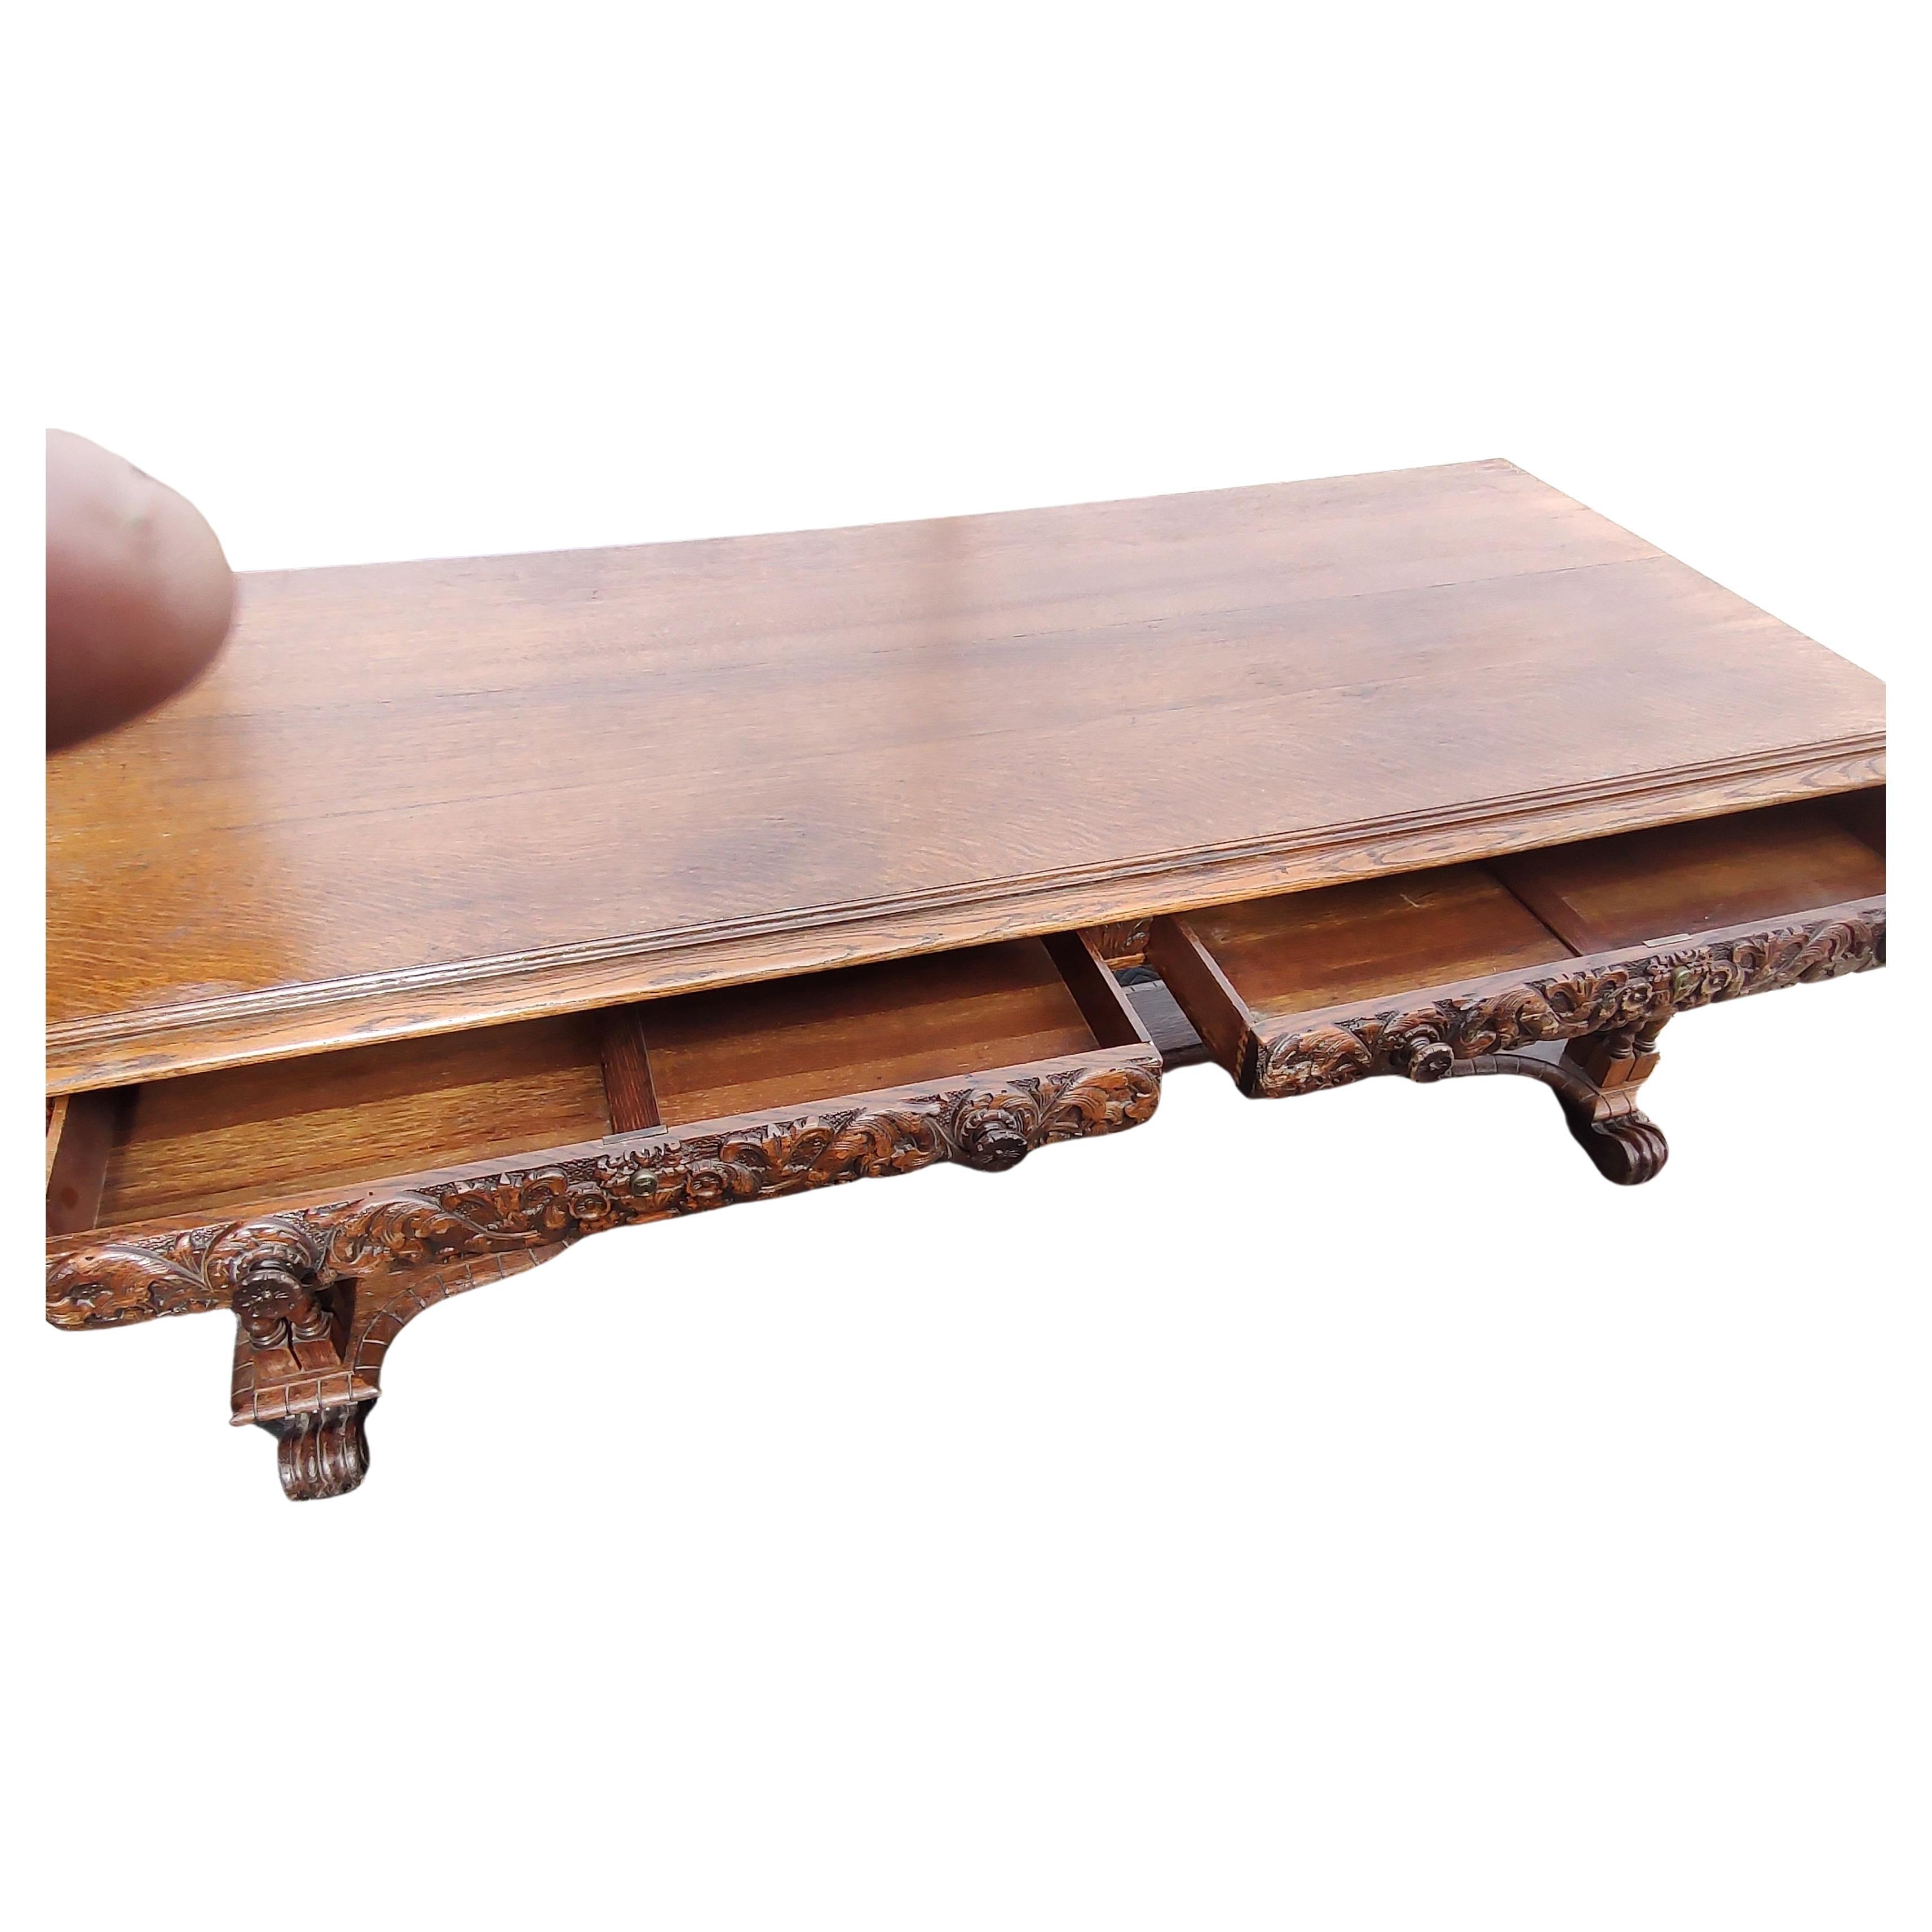 Fabulous and beautifully carved large oak library table or partners desk with two drawers on each side. Quarter sawn oak with amazing grain, beautiful boards top with a carved edge. Four barley turned legs on each corner and three spaced in the